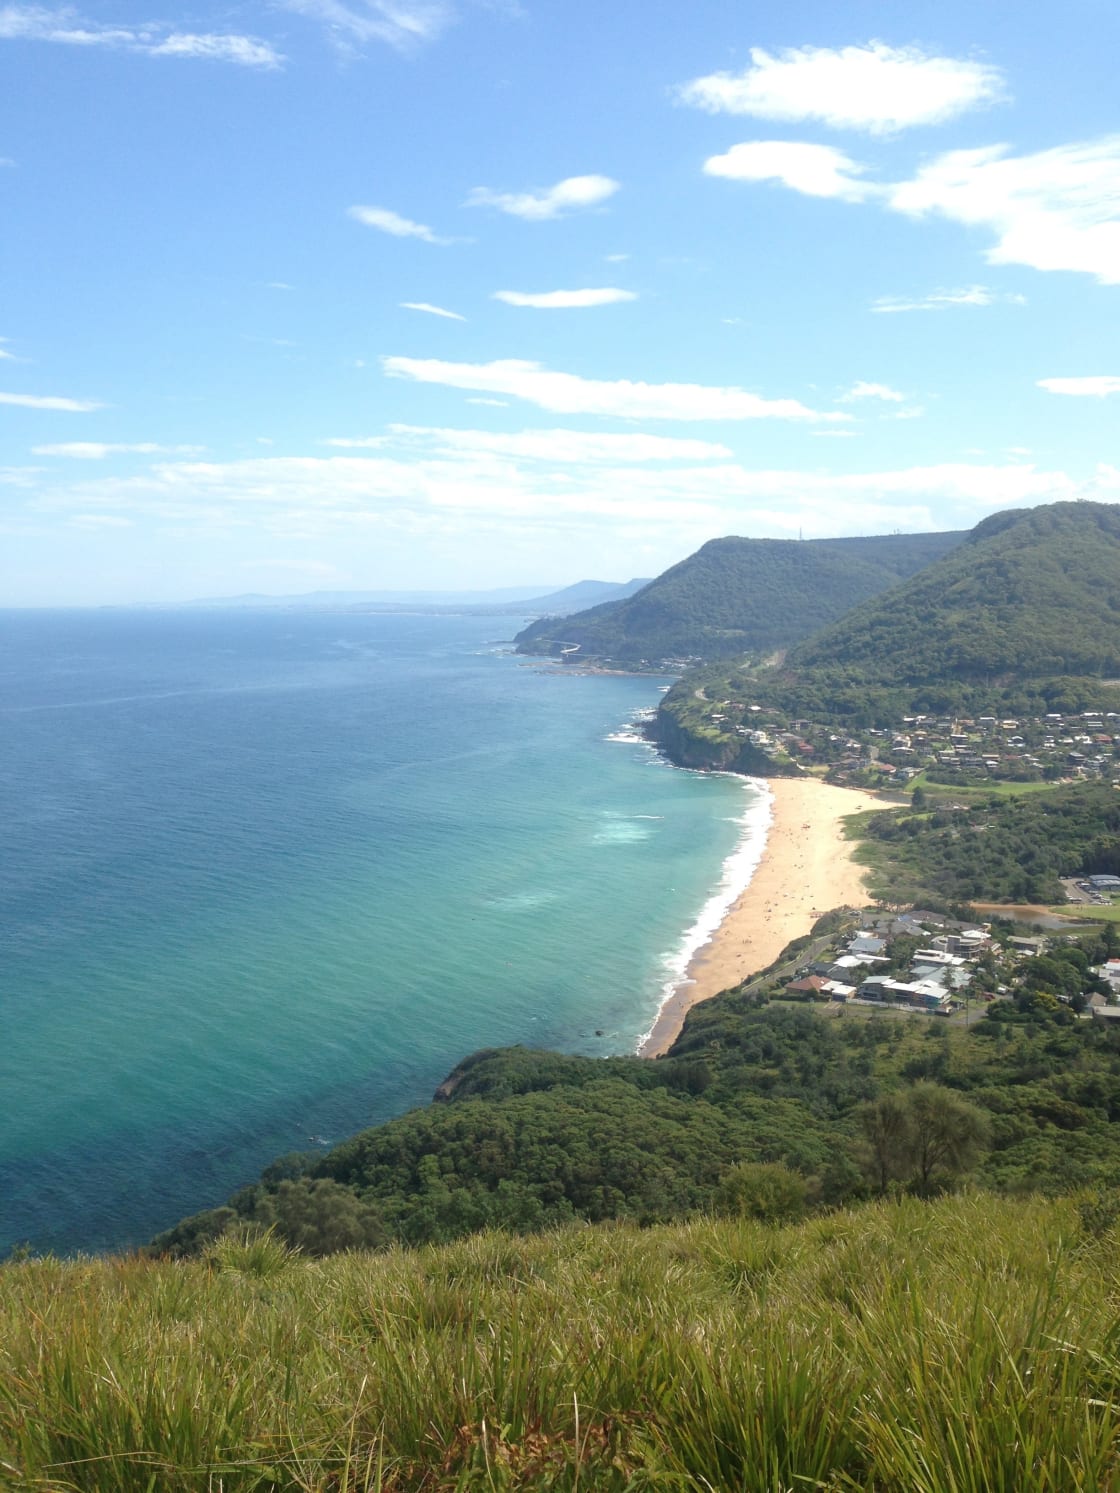 Walk to iconic Bald Hill to watch the hang-gliders, have a coffee or continue the path down to Stanwell Park Beach
